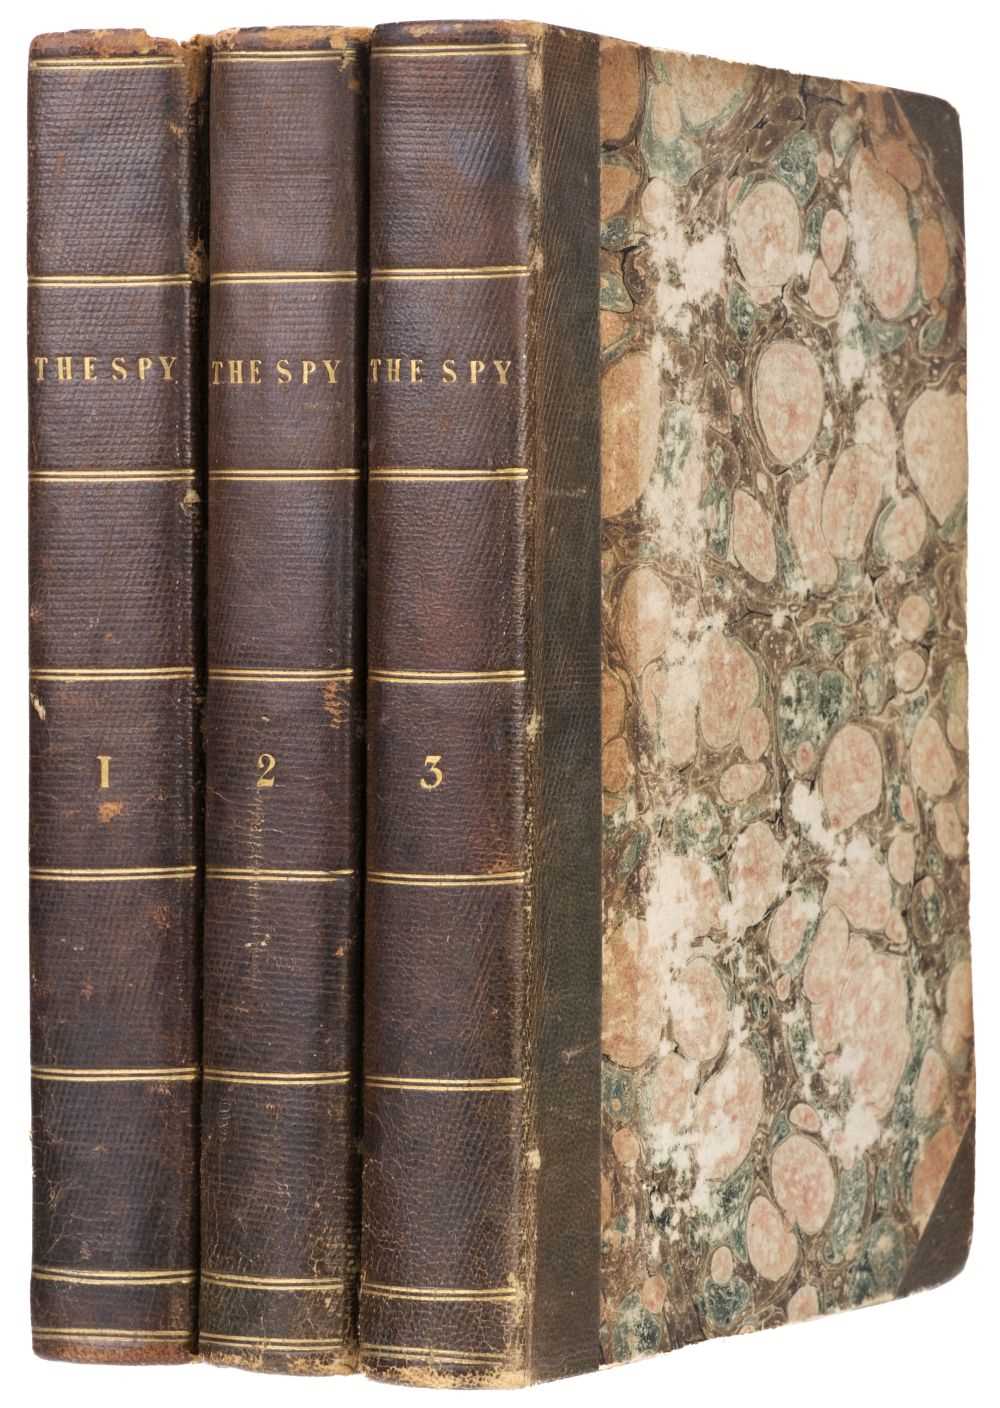 Lot 314 - [Cooper, James Fenimore]. The Spy, 3 volumes, 1st UK edition, 1822